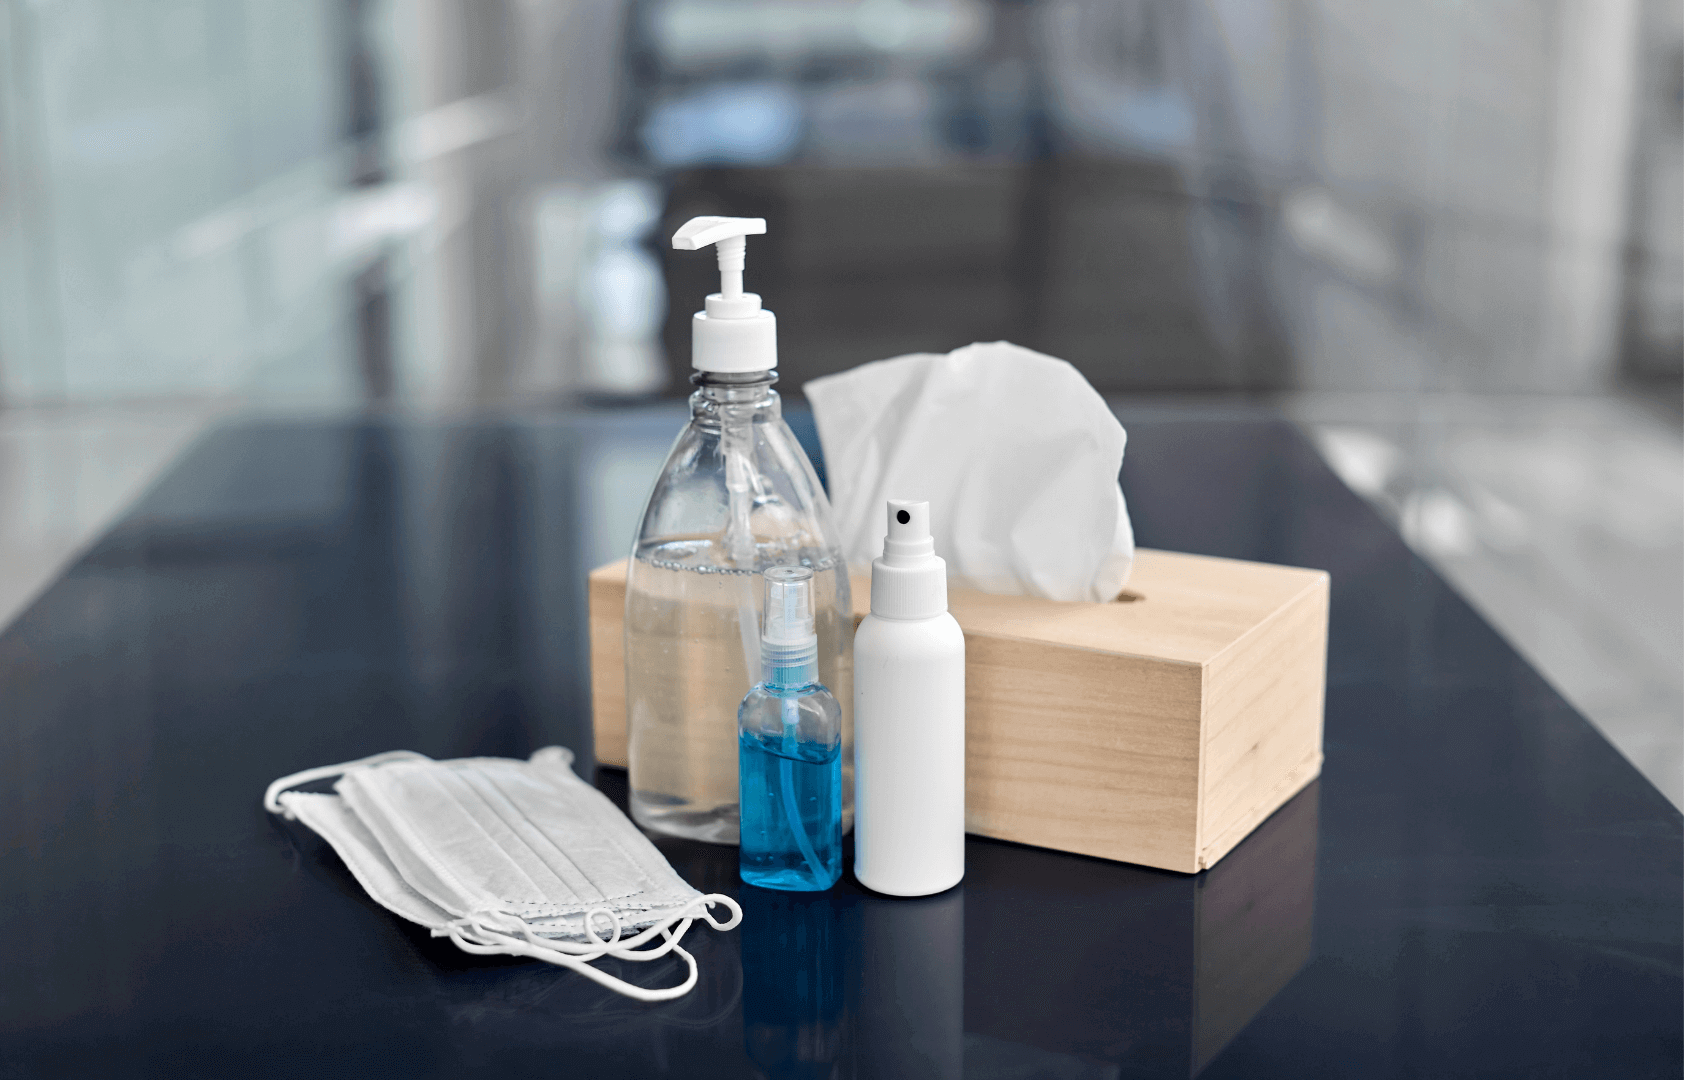 COVID-19: Why Hand Sanitizer & PPE are Still as Important as Ever